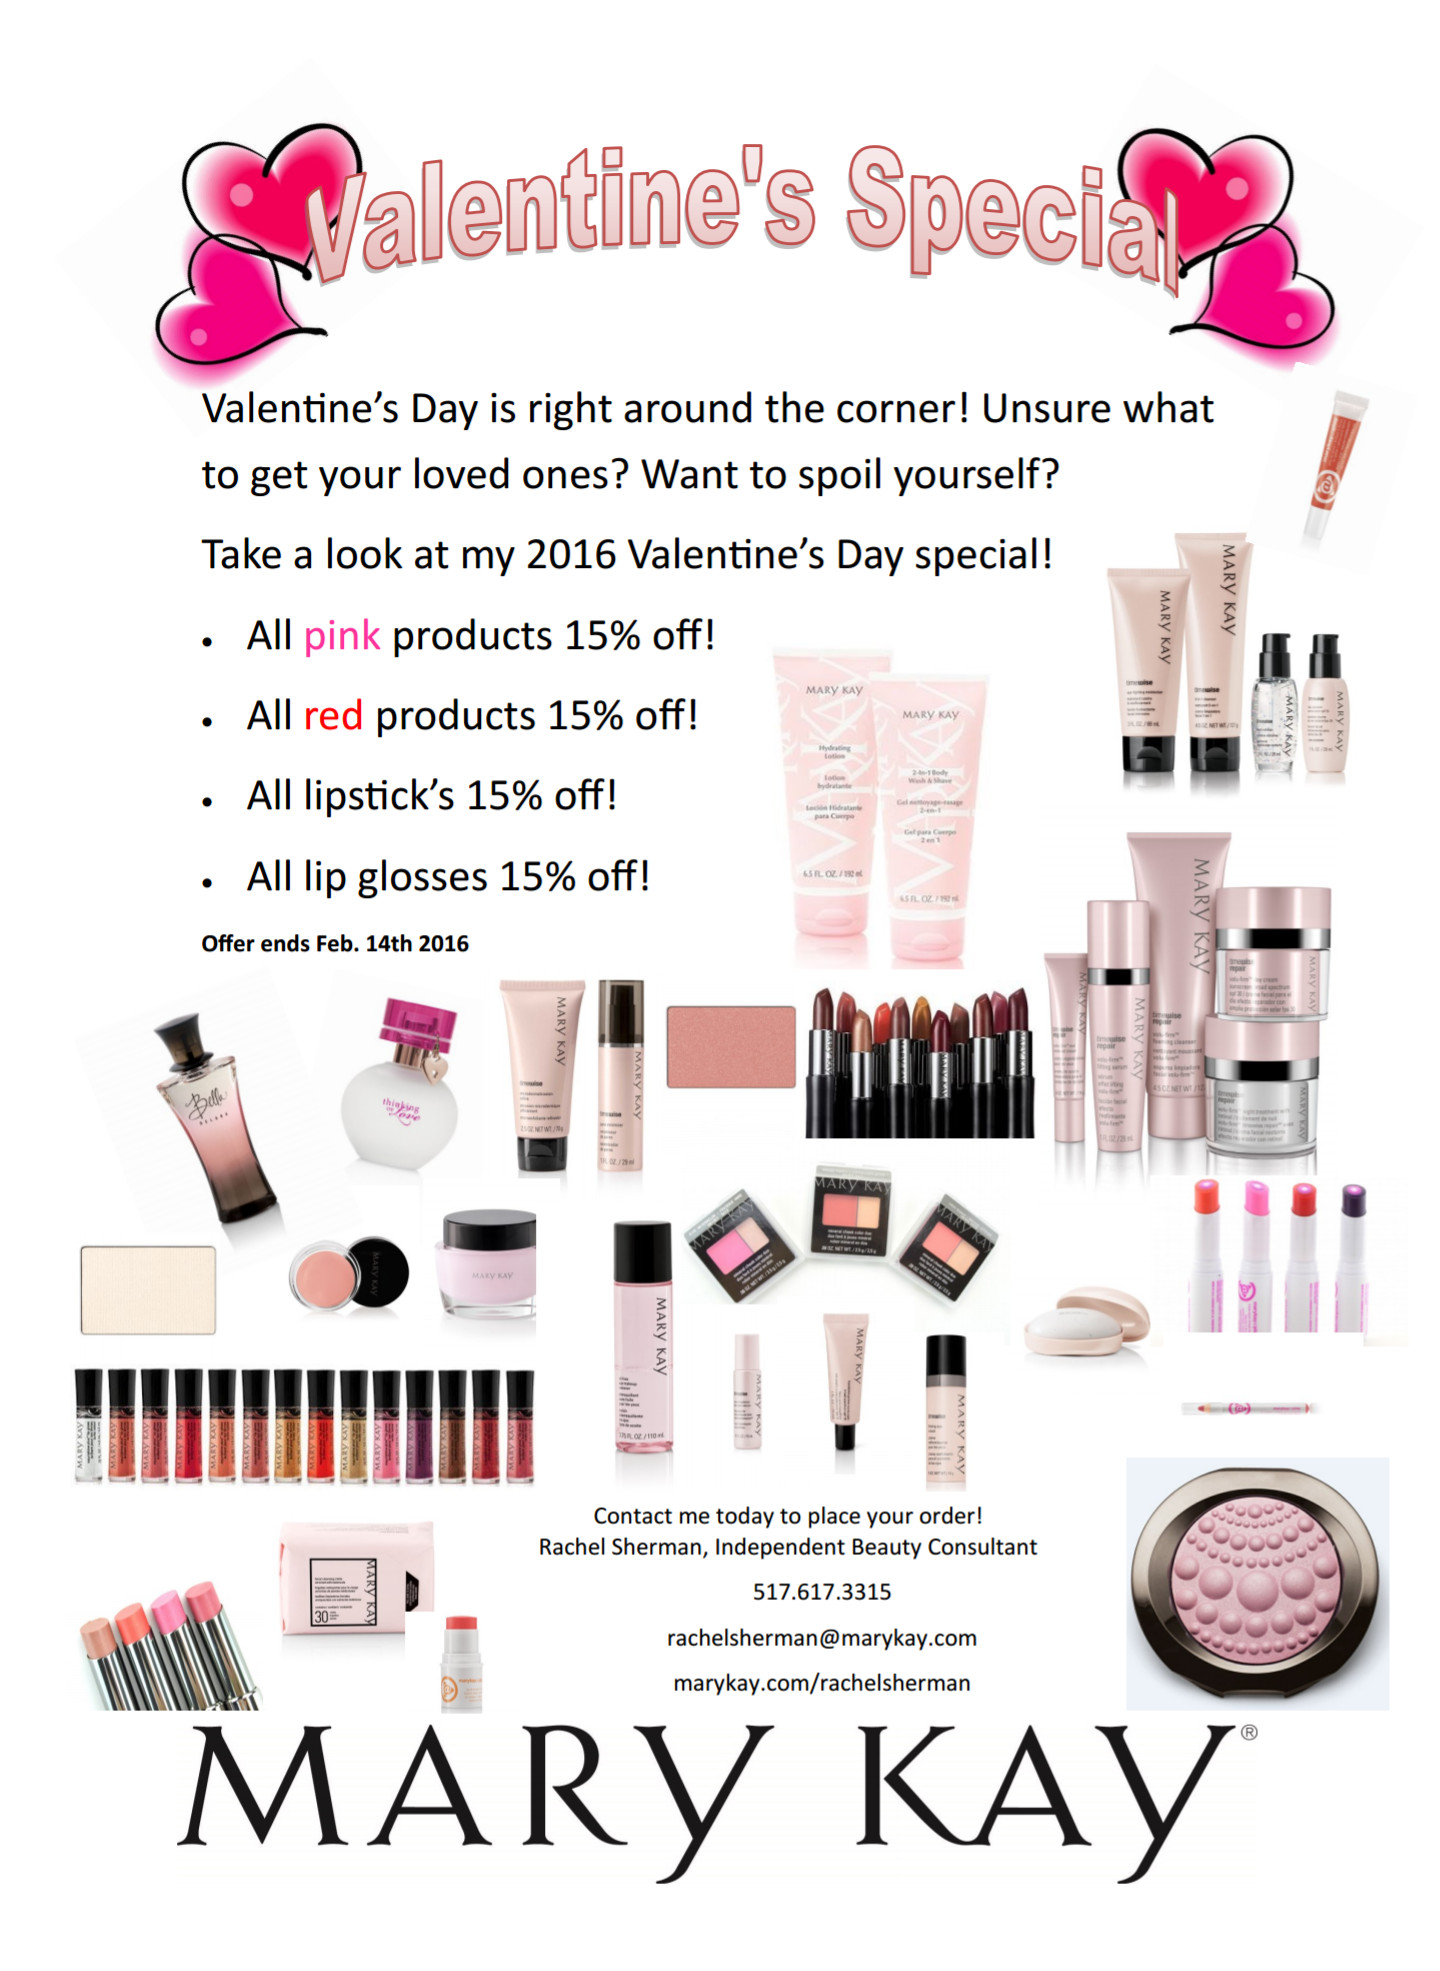 Mary Kay Valentines Day Ideas
 Mary Kay Valentine s Special Contact me today to place